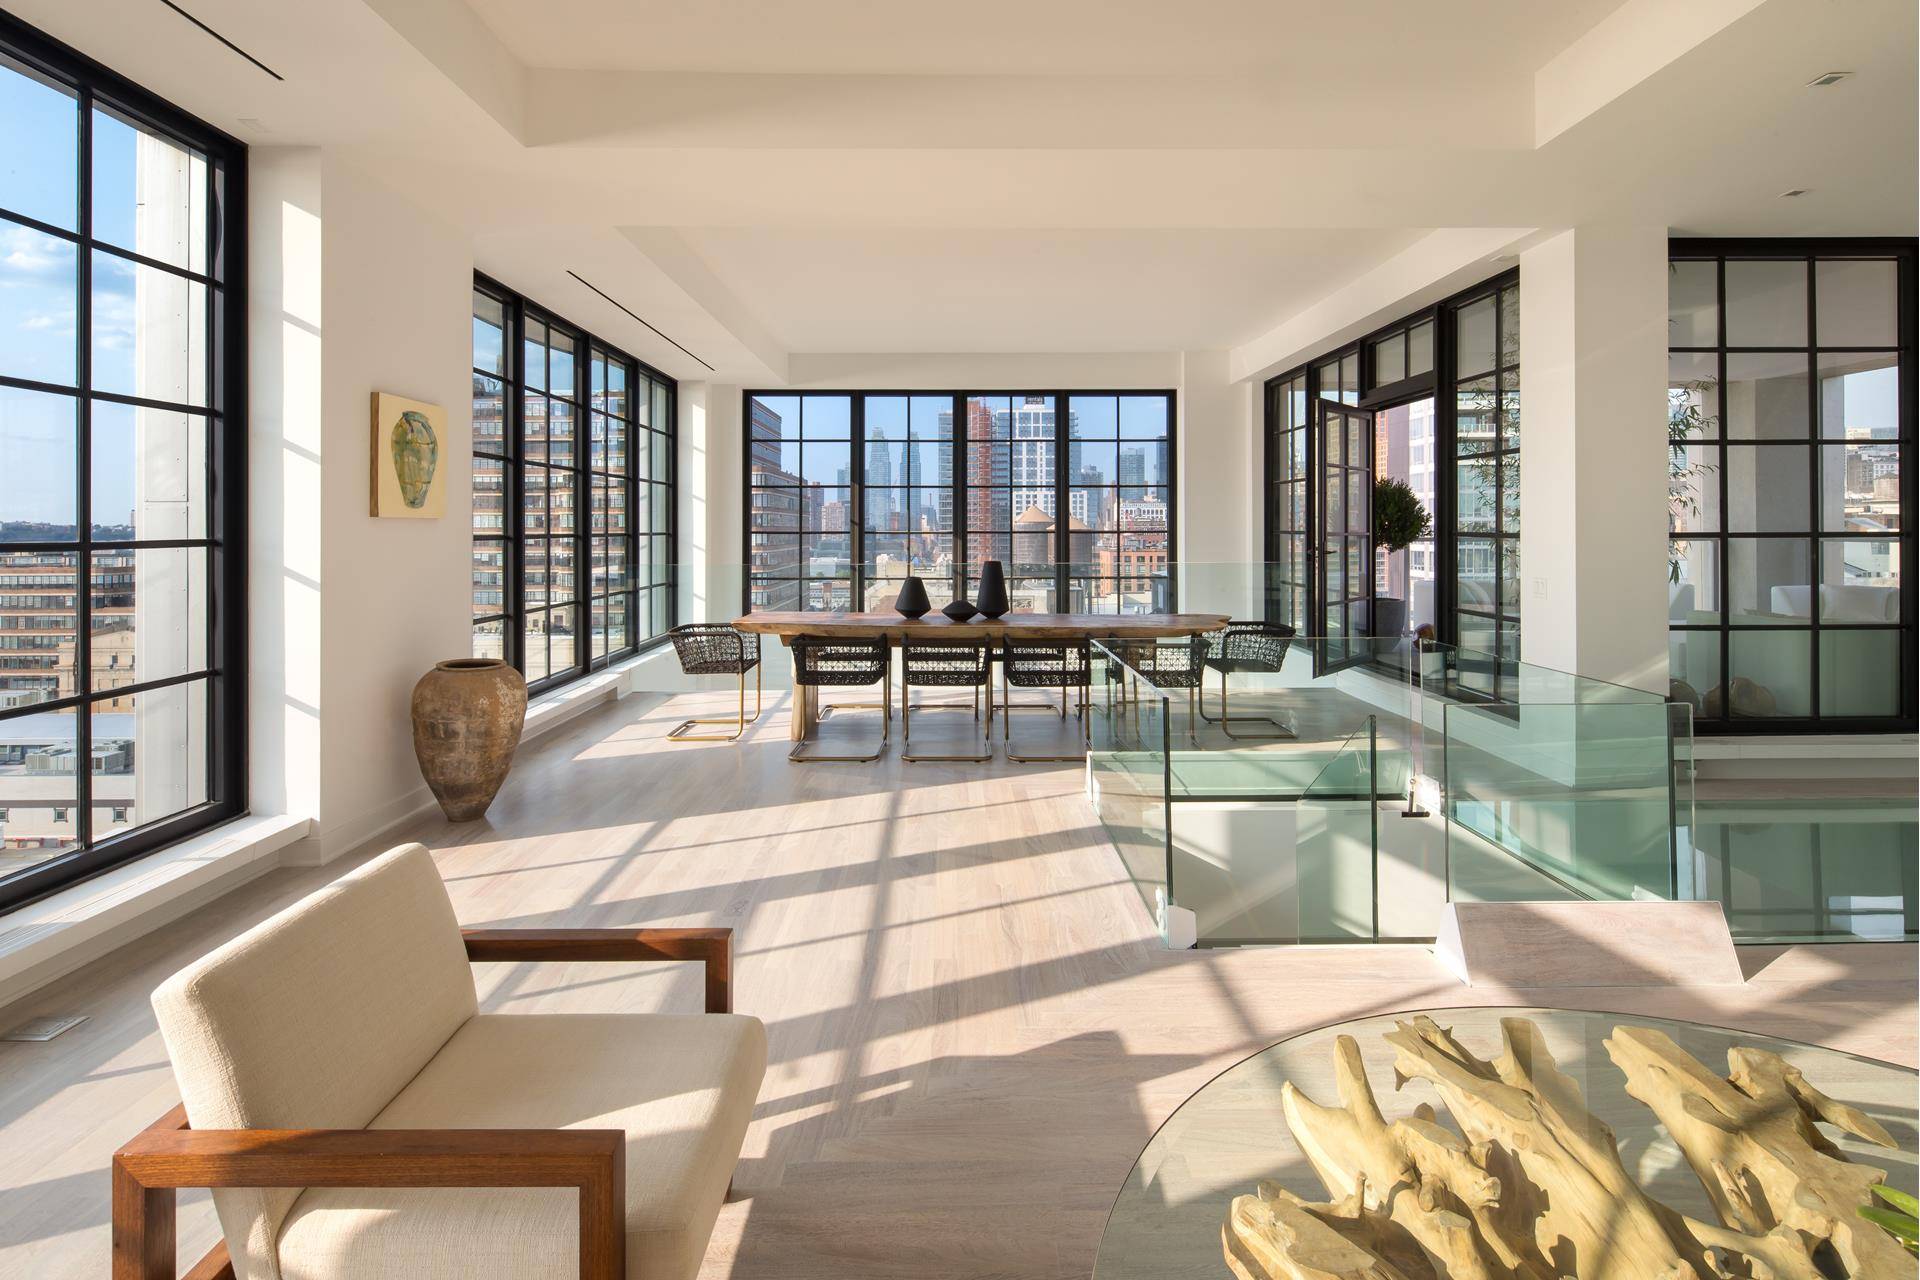 Welcome to 200 11th Avenue, where sophistication meets architectural mastery in the heart of Chelsea.